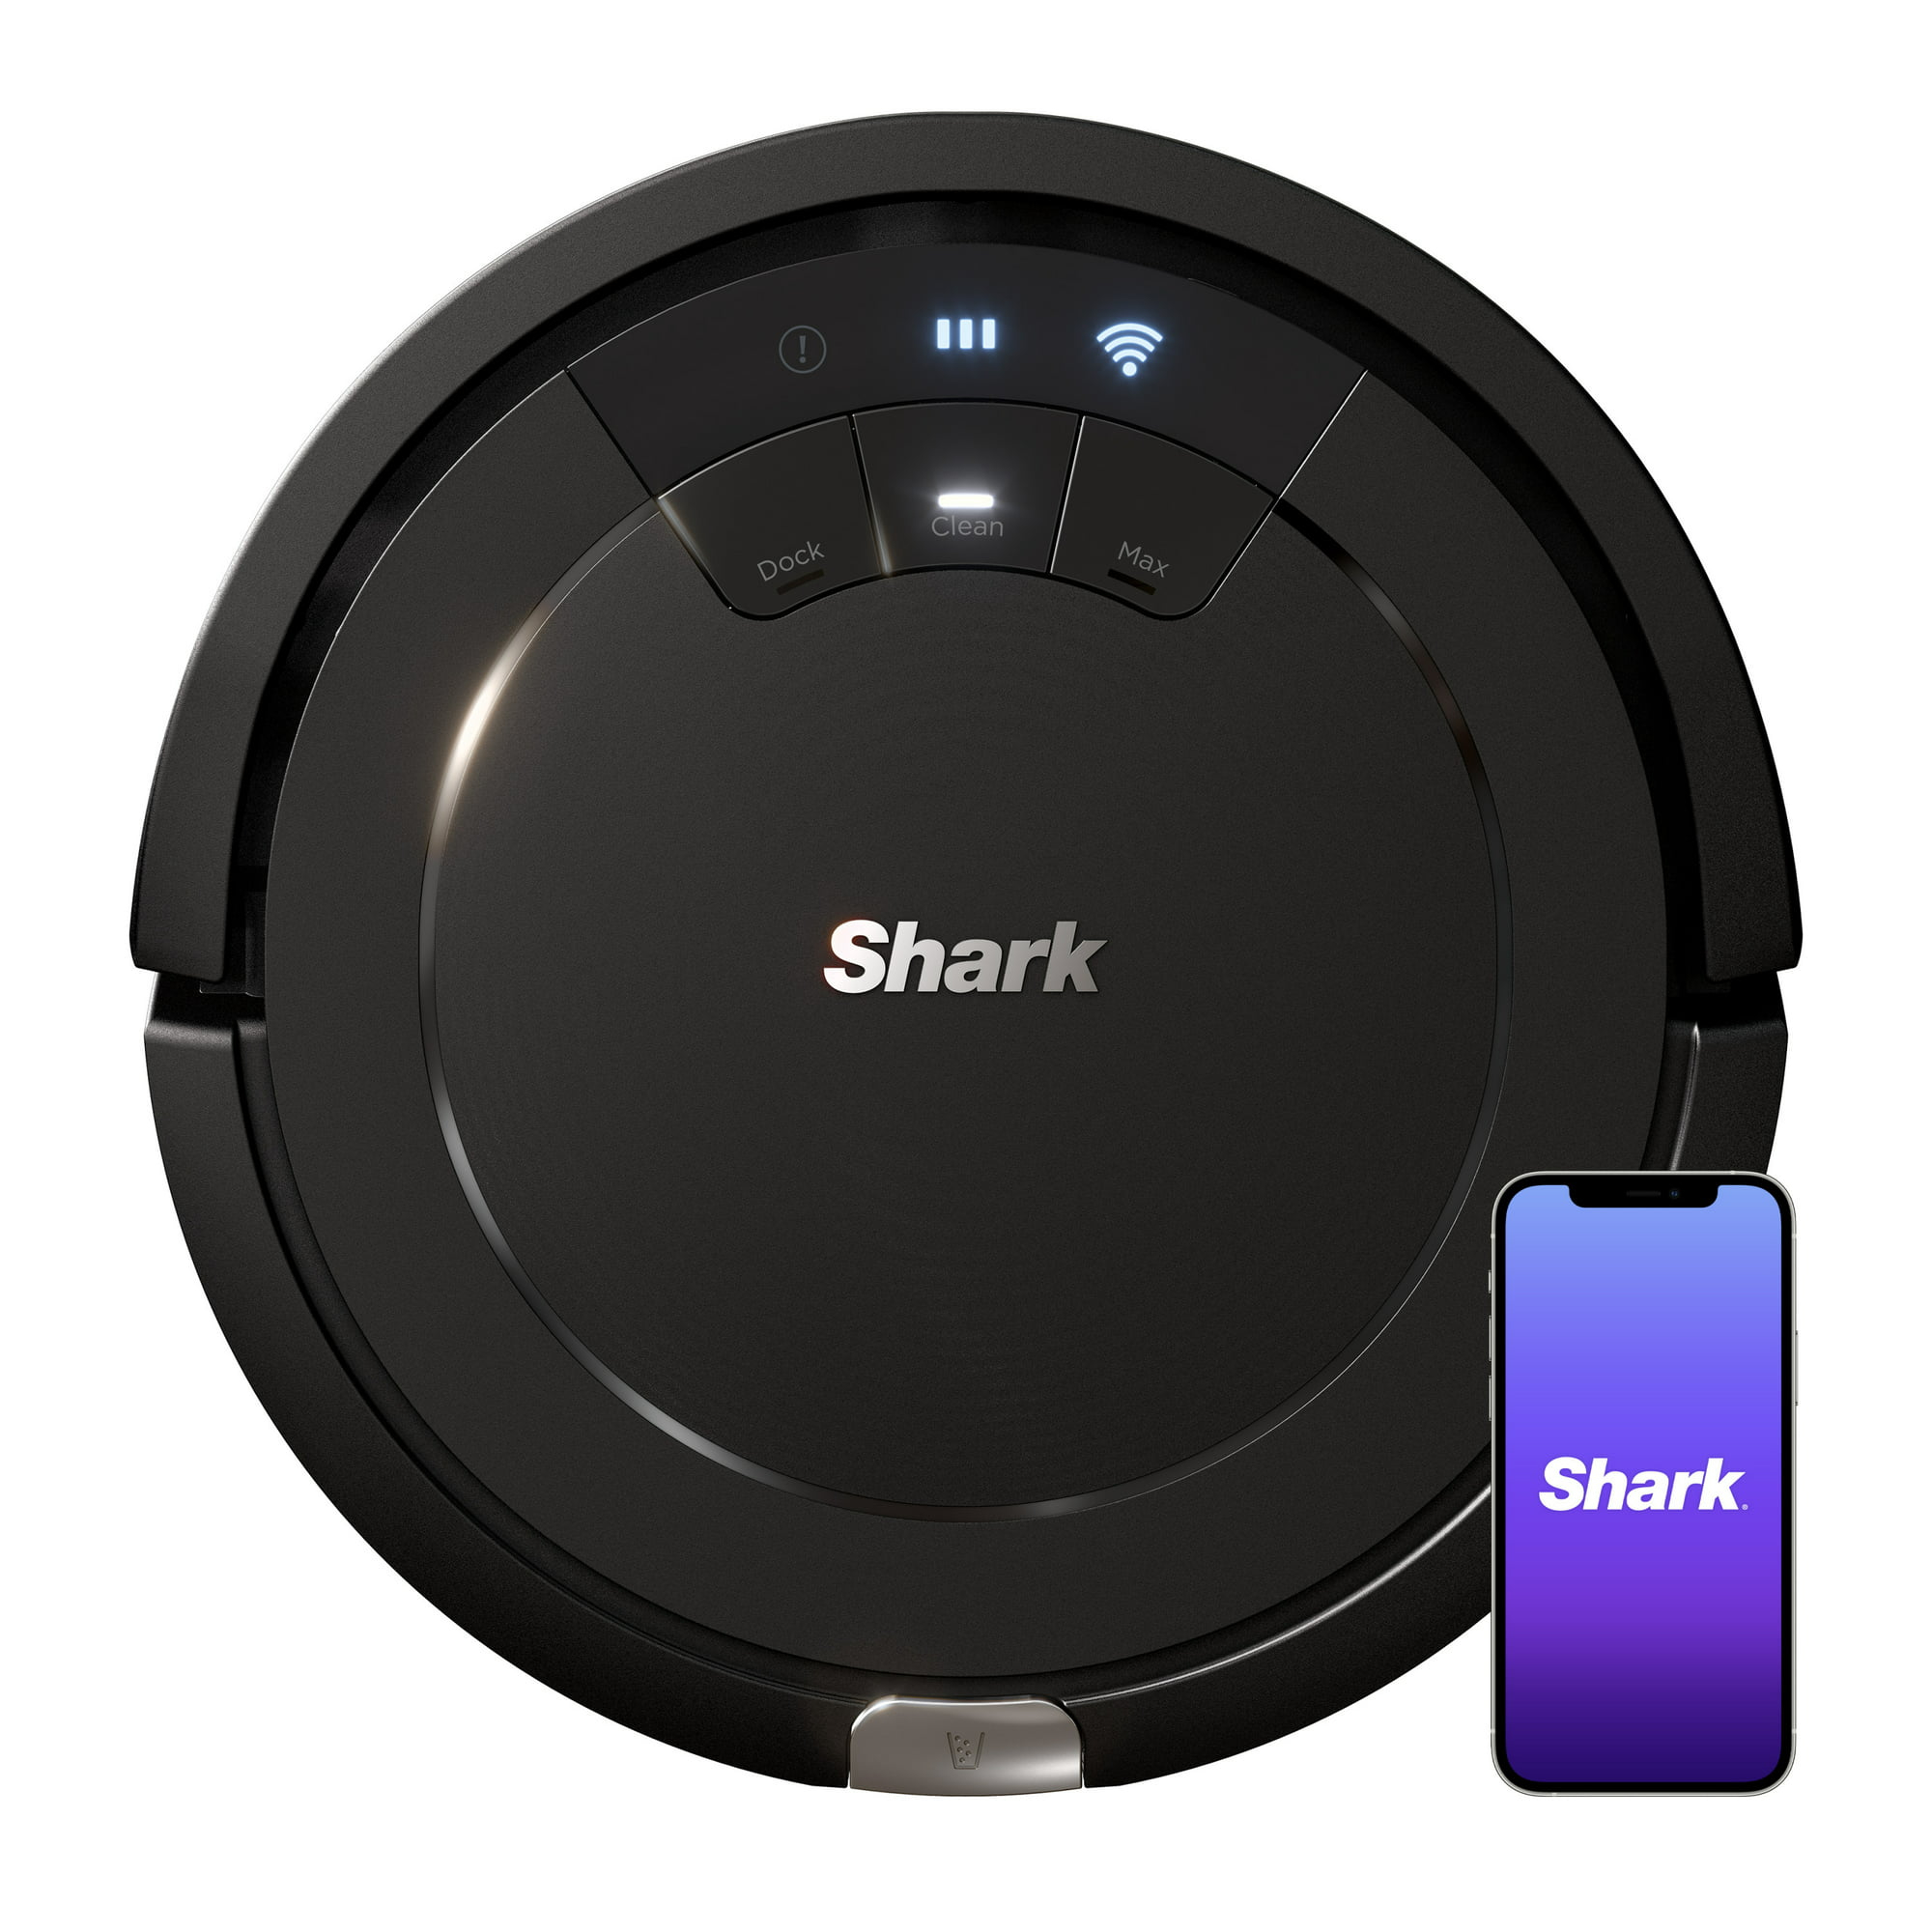 shark robot vacuum and phone showing compatible app